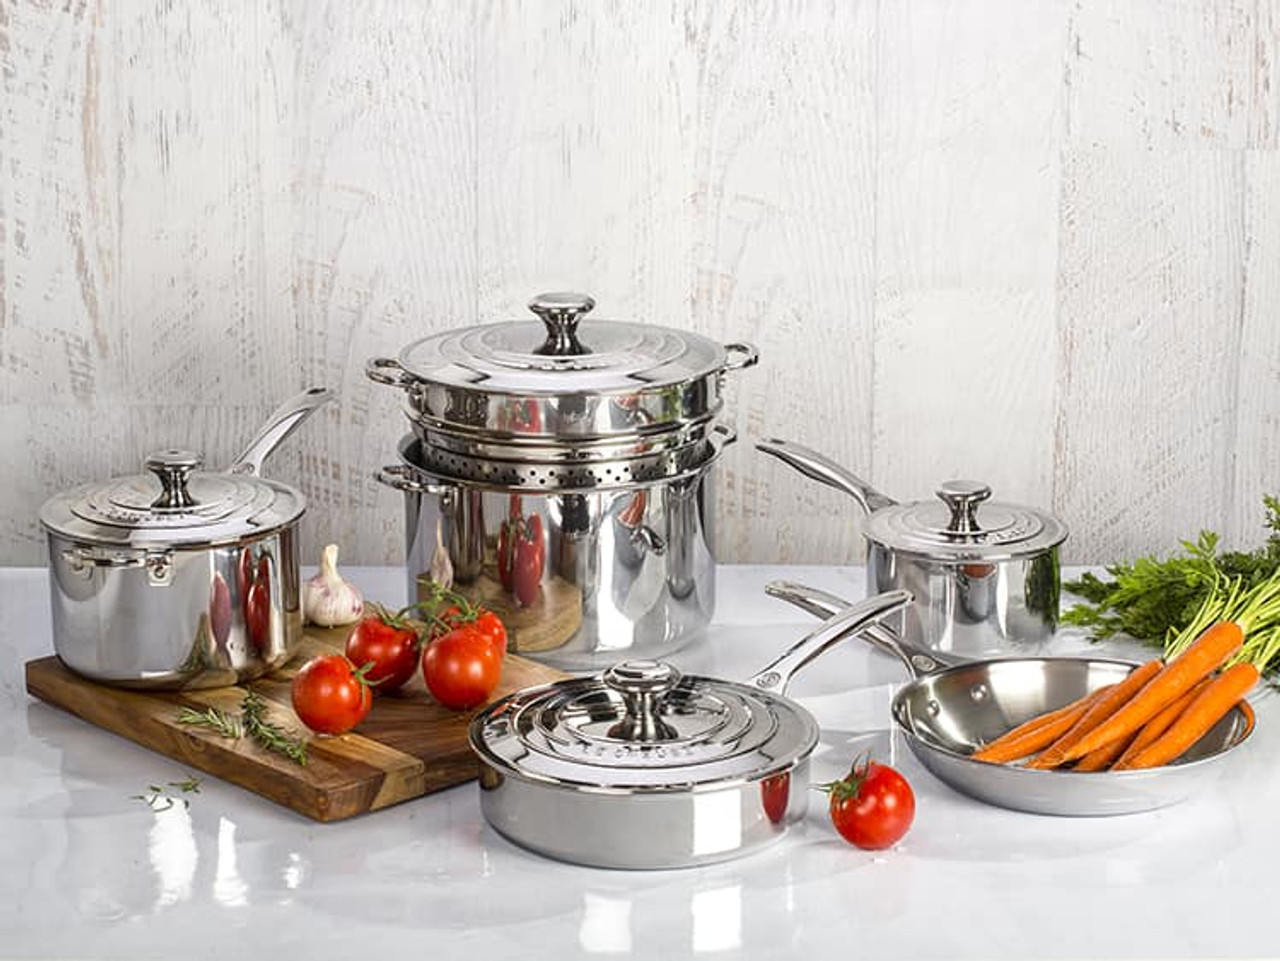 Le Creuset ~ Stainless Steel ~ 7 Piece Set (10 Fry Pan, 2 qt. Saucepan w/ Lid, 3 qt. Saute Pan w/Lid, 7 qt. Stockpot w/Lid), Price $580.00 in  Madison, MS from Persnickety